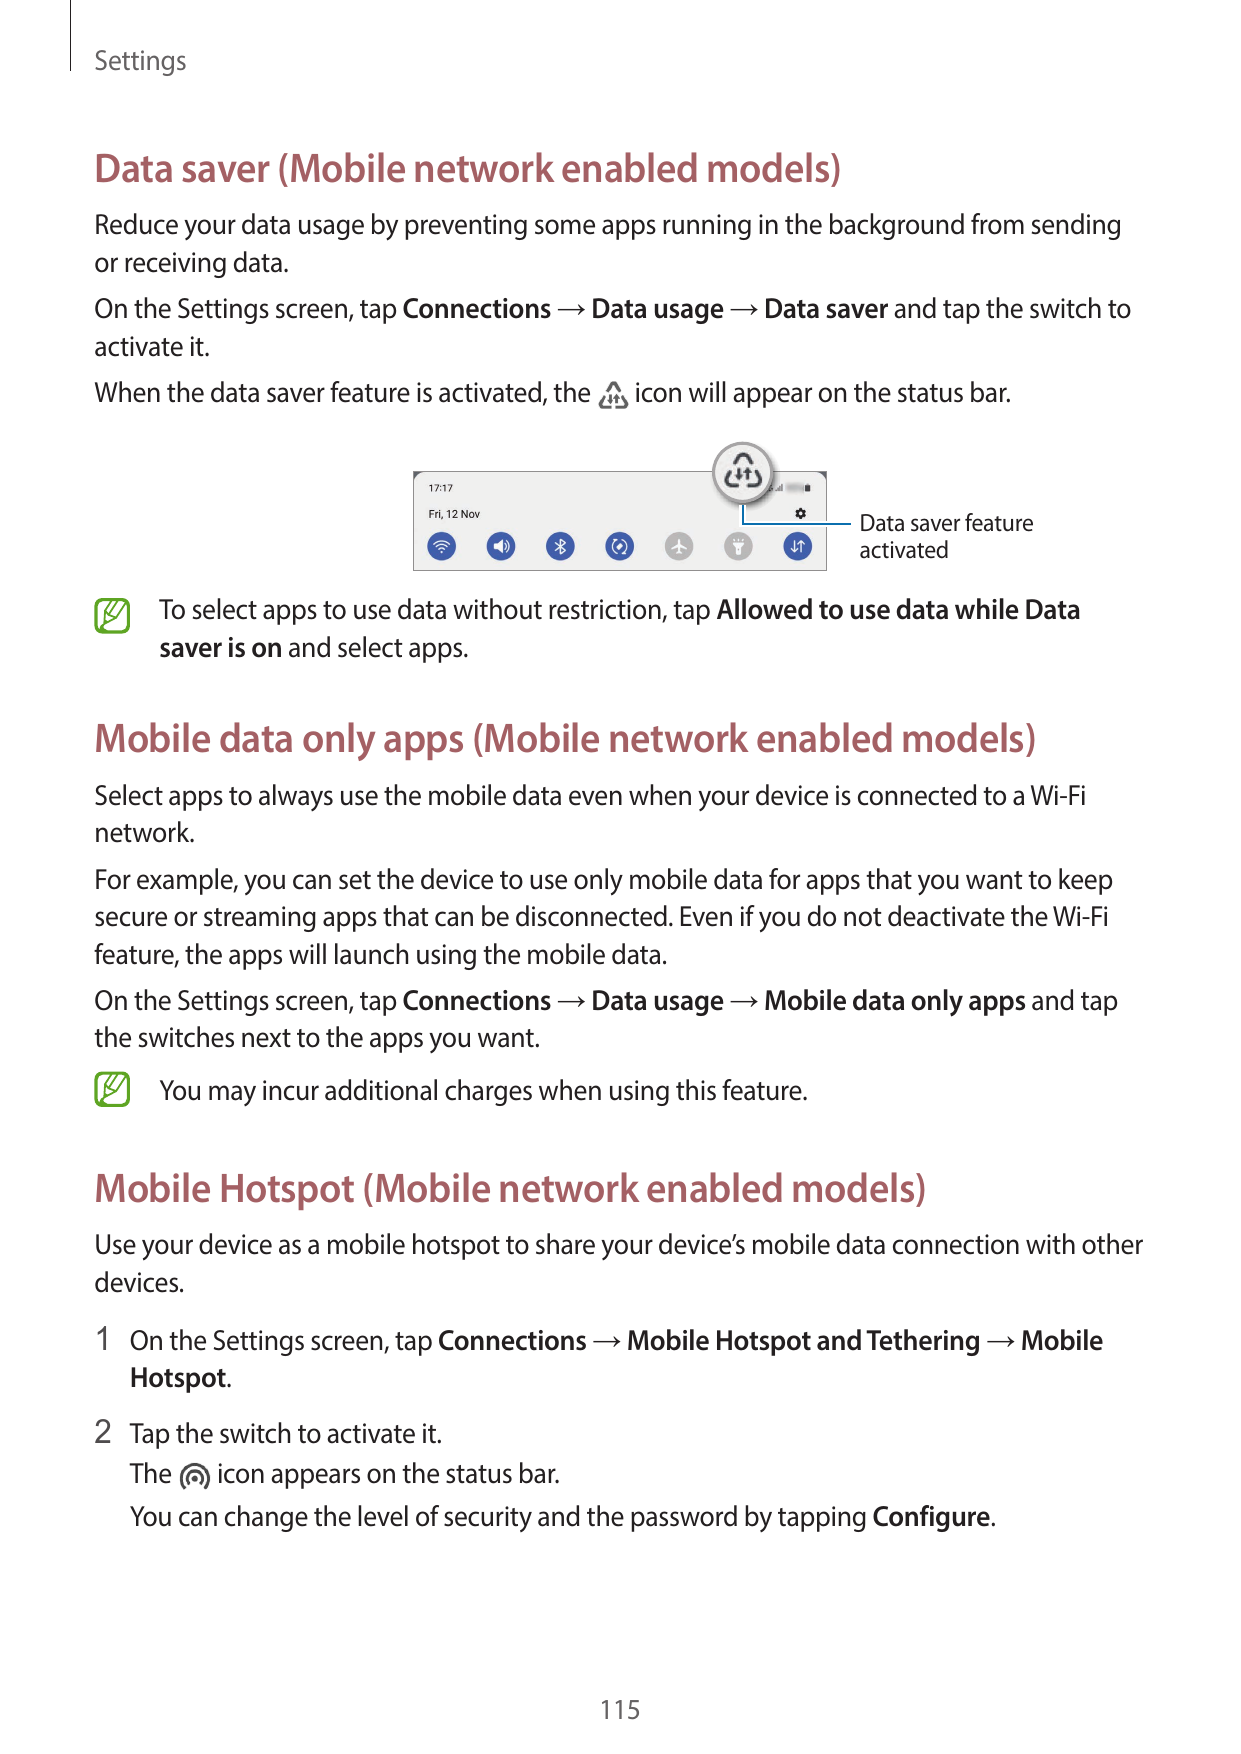 SettingsData saver (Mobile network enabled models)Reduce your data usage by preventing some apps running in the background from 